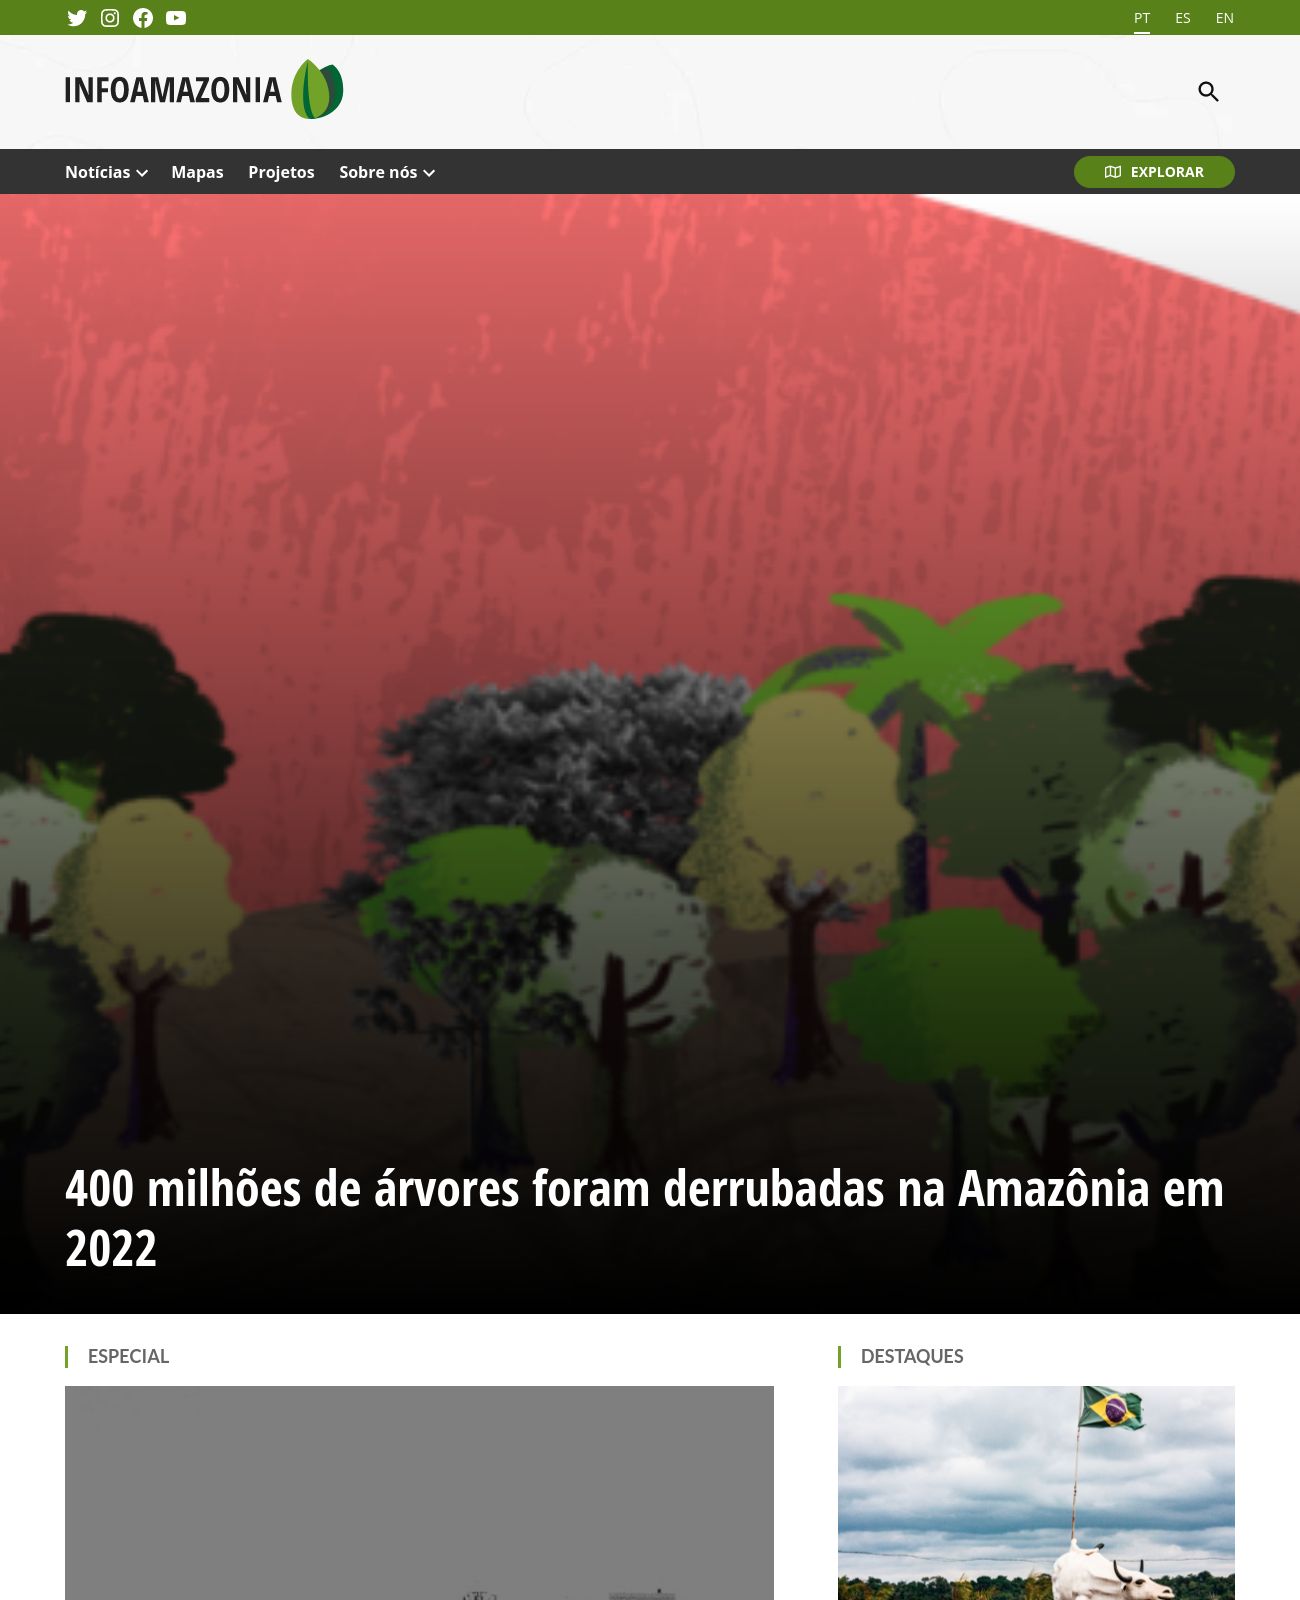 InfoAmazonia at 2022-09-15 20:51:07-03:00 local time